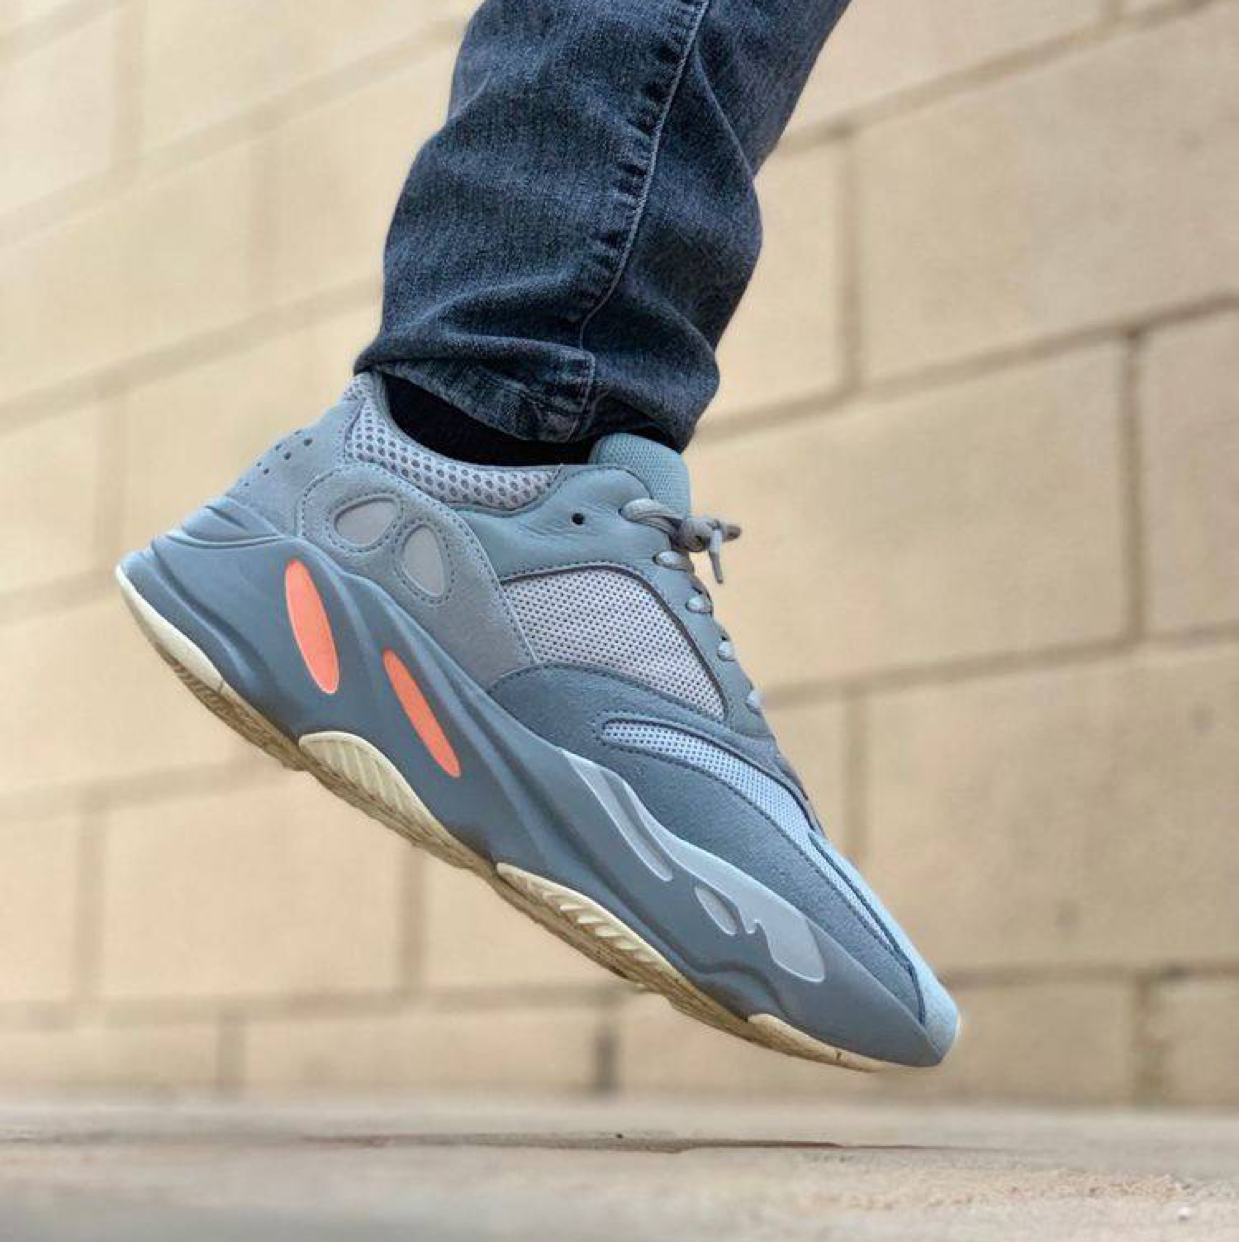 adidas yeezy boost 700 inertia outfit